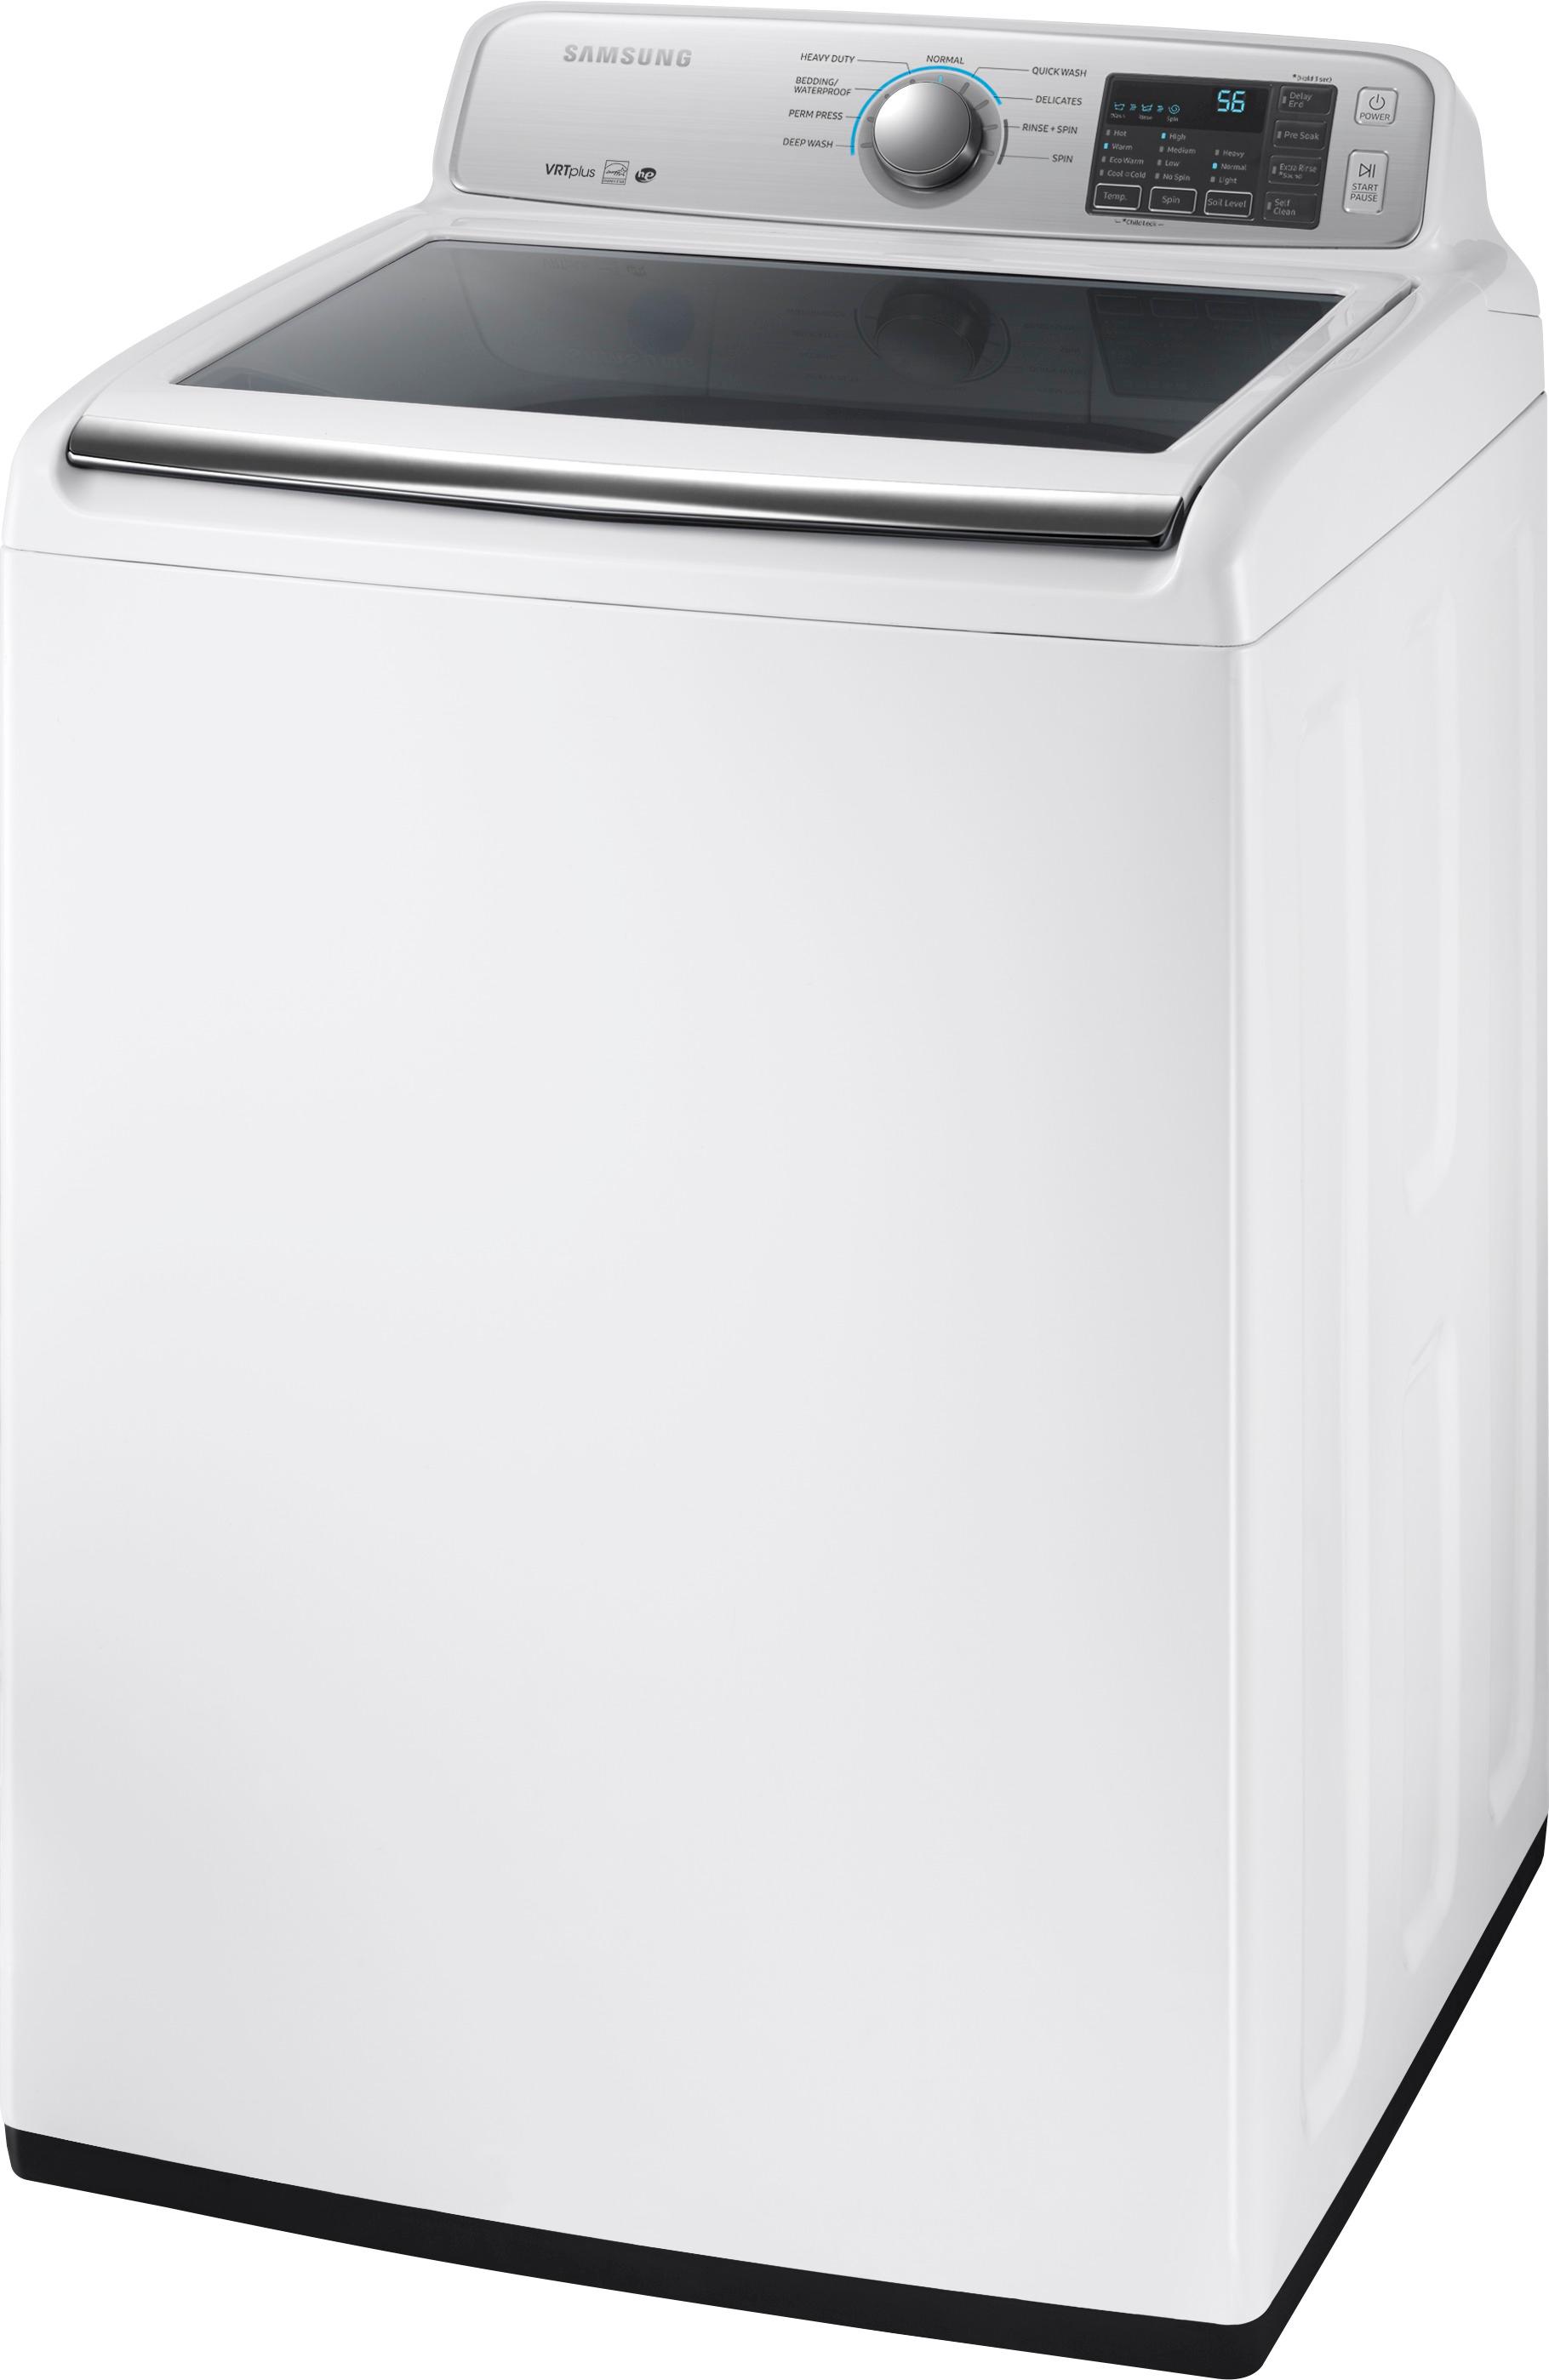 Questions and Answers: Samsung 4.5 Cu. Ft. 9-Cycle Top-Loading Washer ...